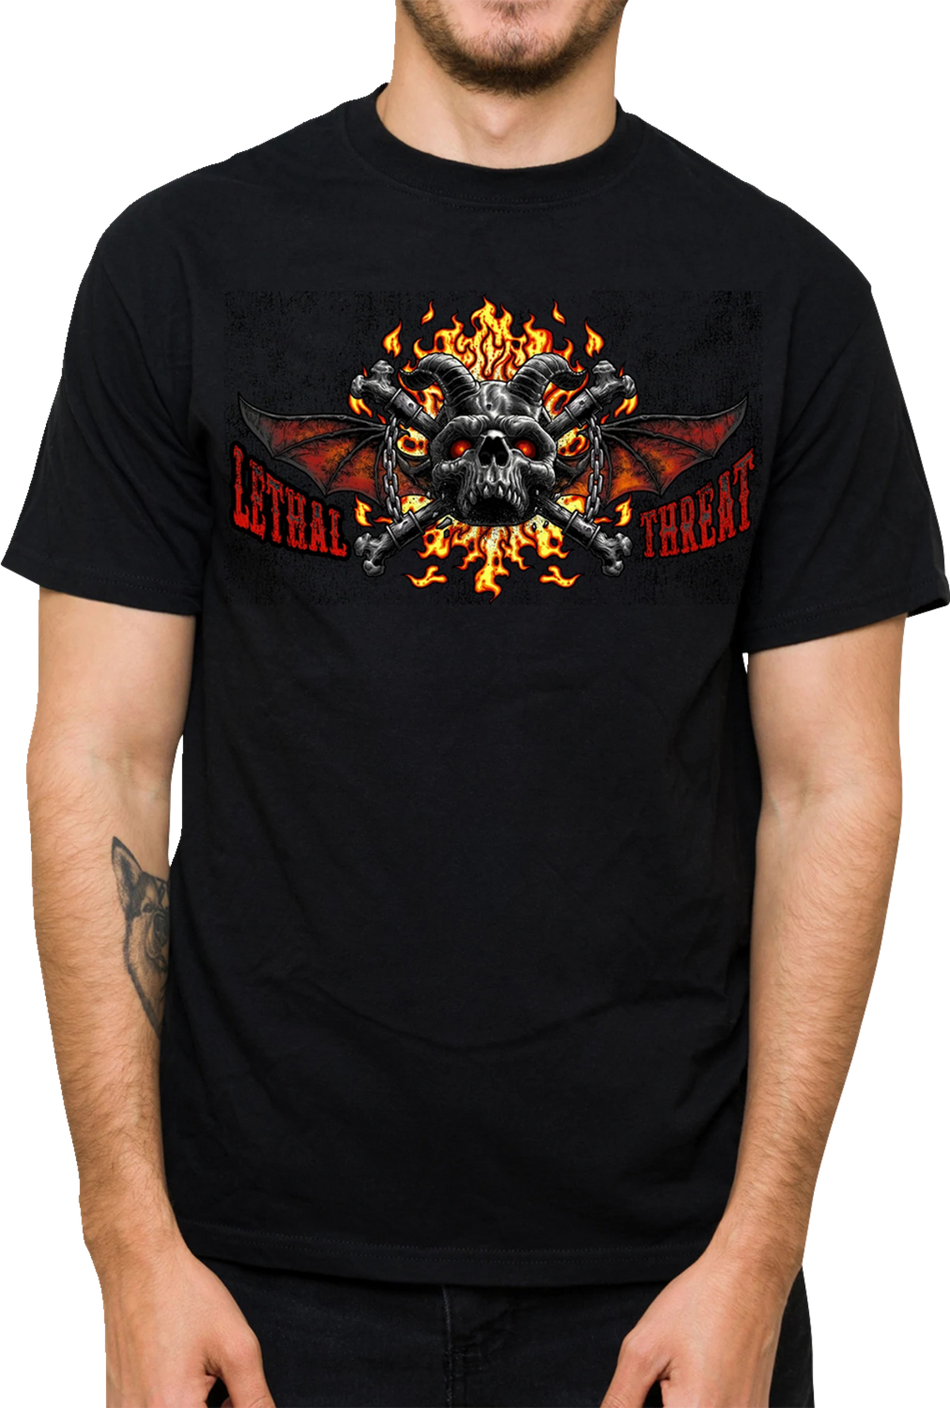 LETHAL THREAT Hell Was Full T-Shirt - Black - Large LT20901L